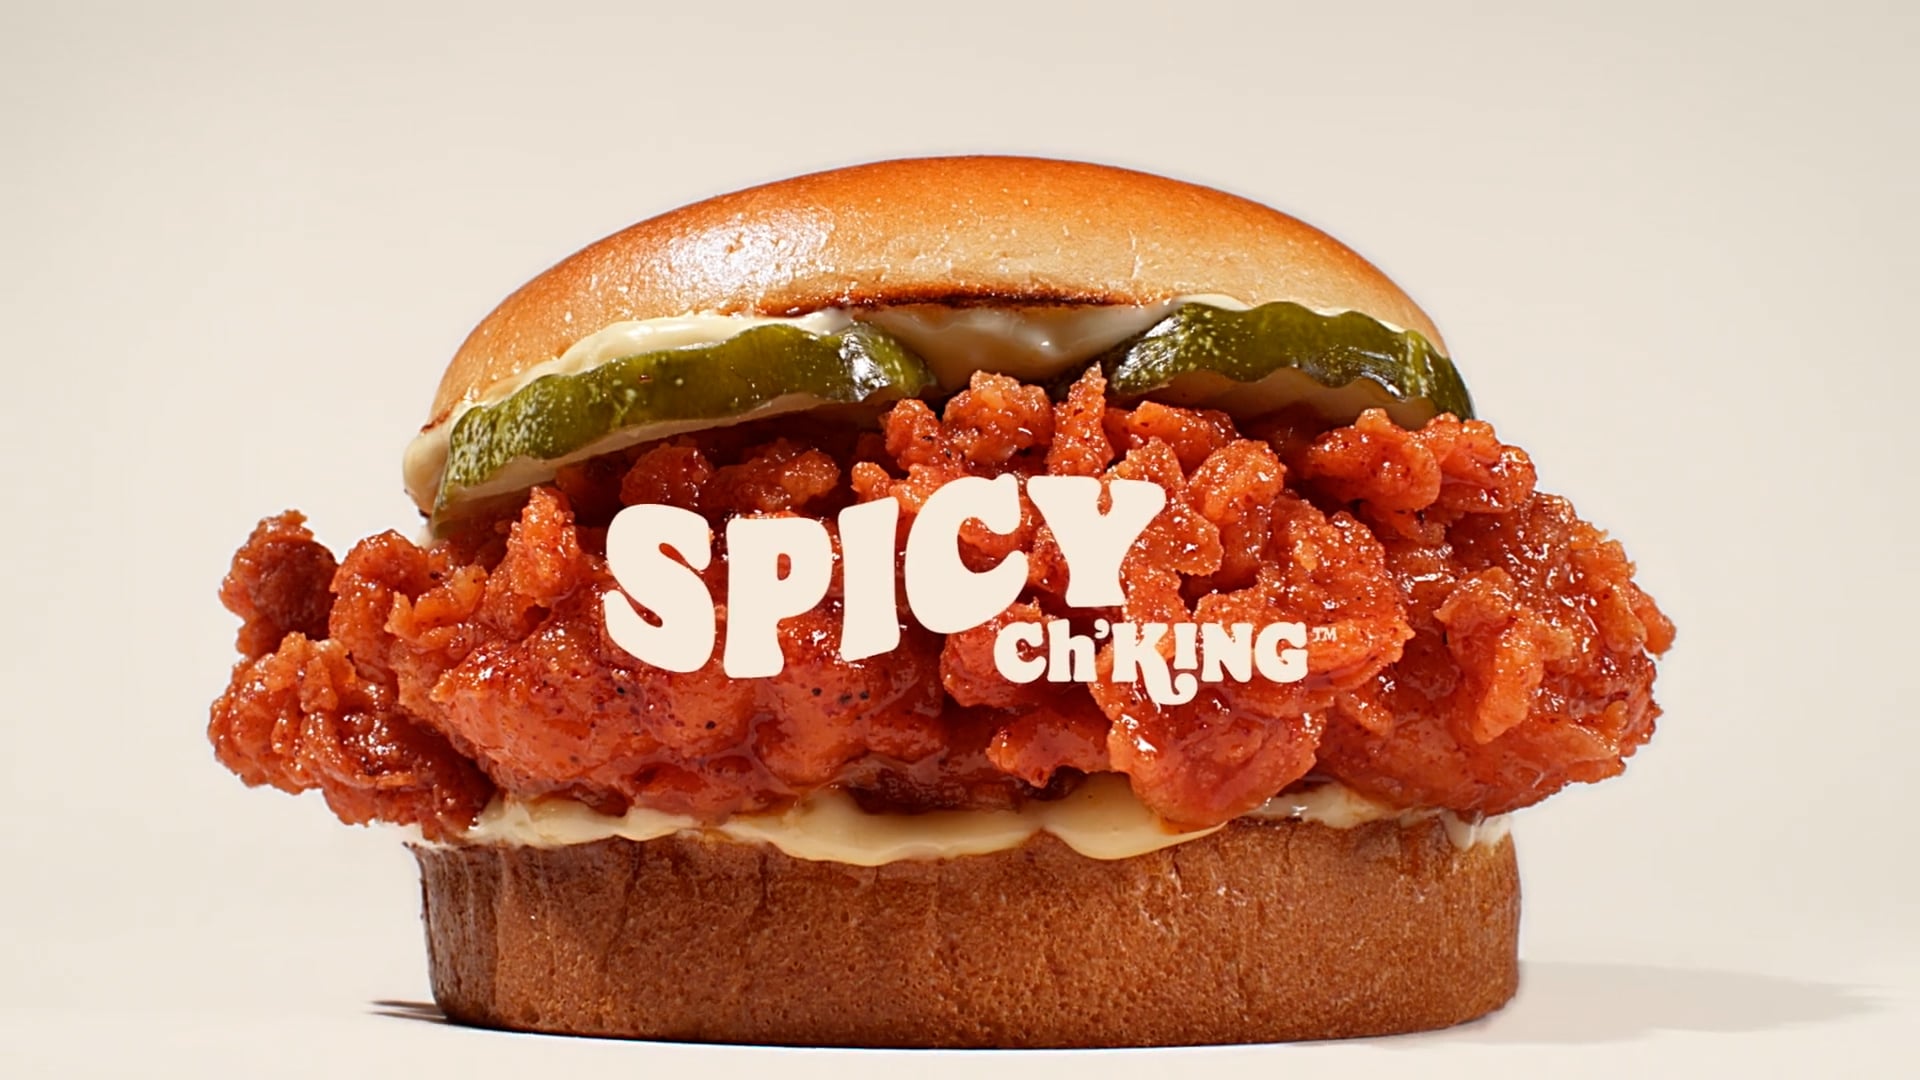 Burger King "Spicy Ch'King"